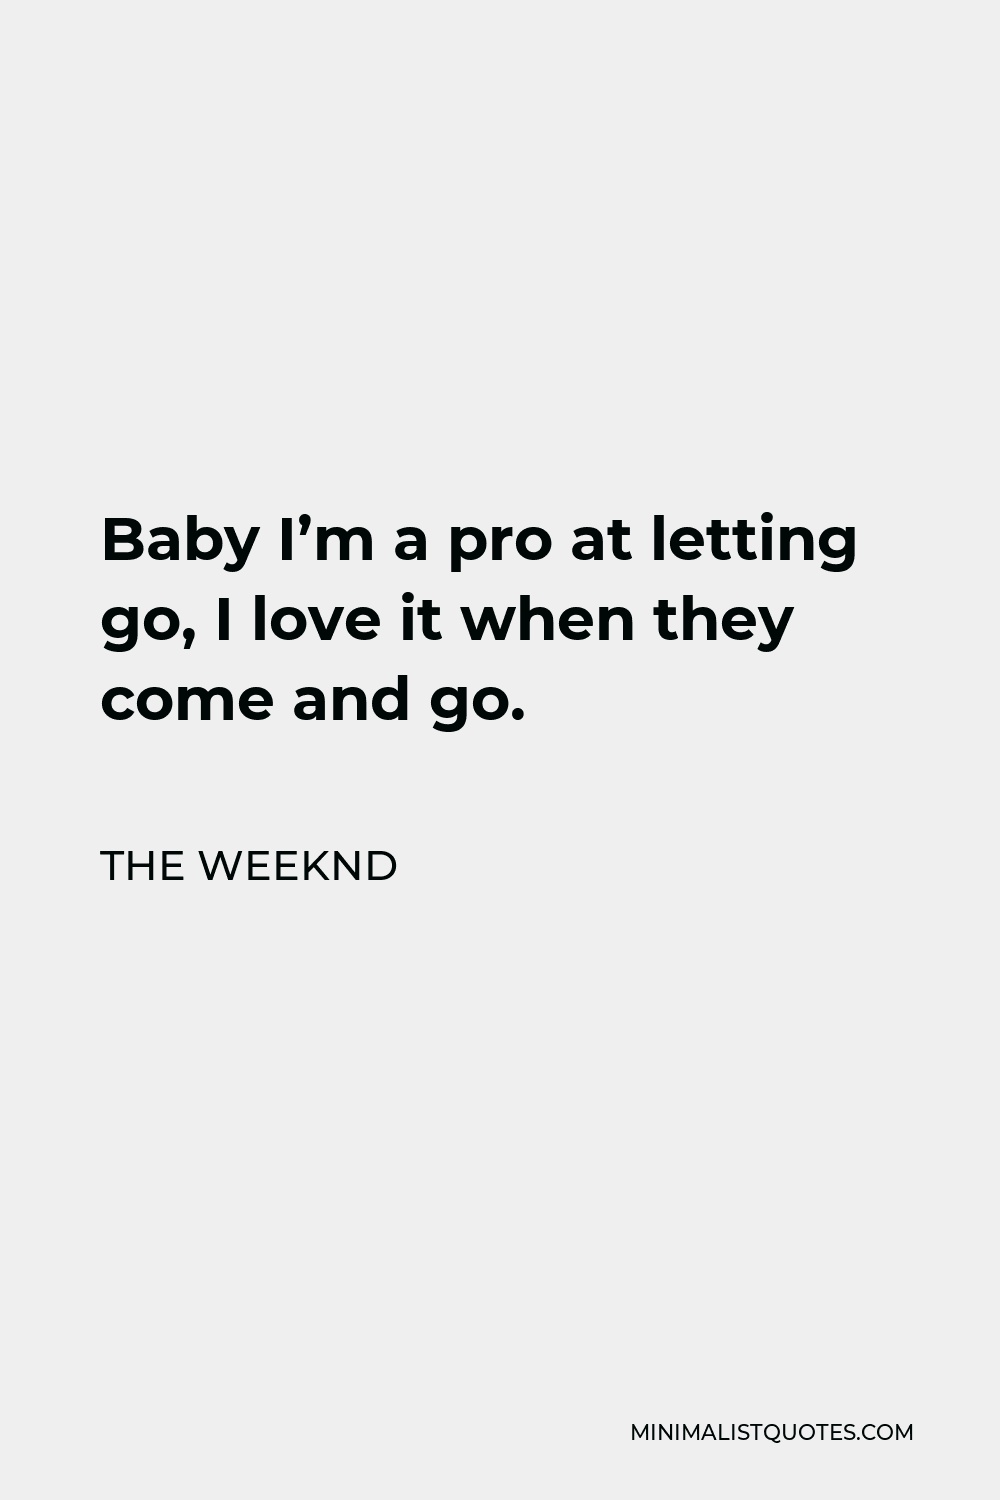 The Weeknd Quote - Baby I’m a pro at letting go, I love it when they come and go.